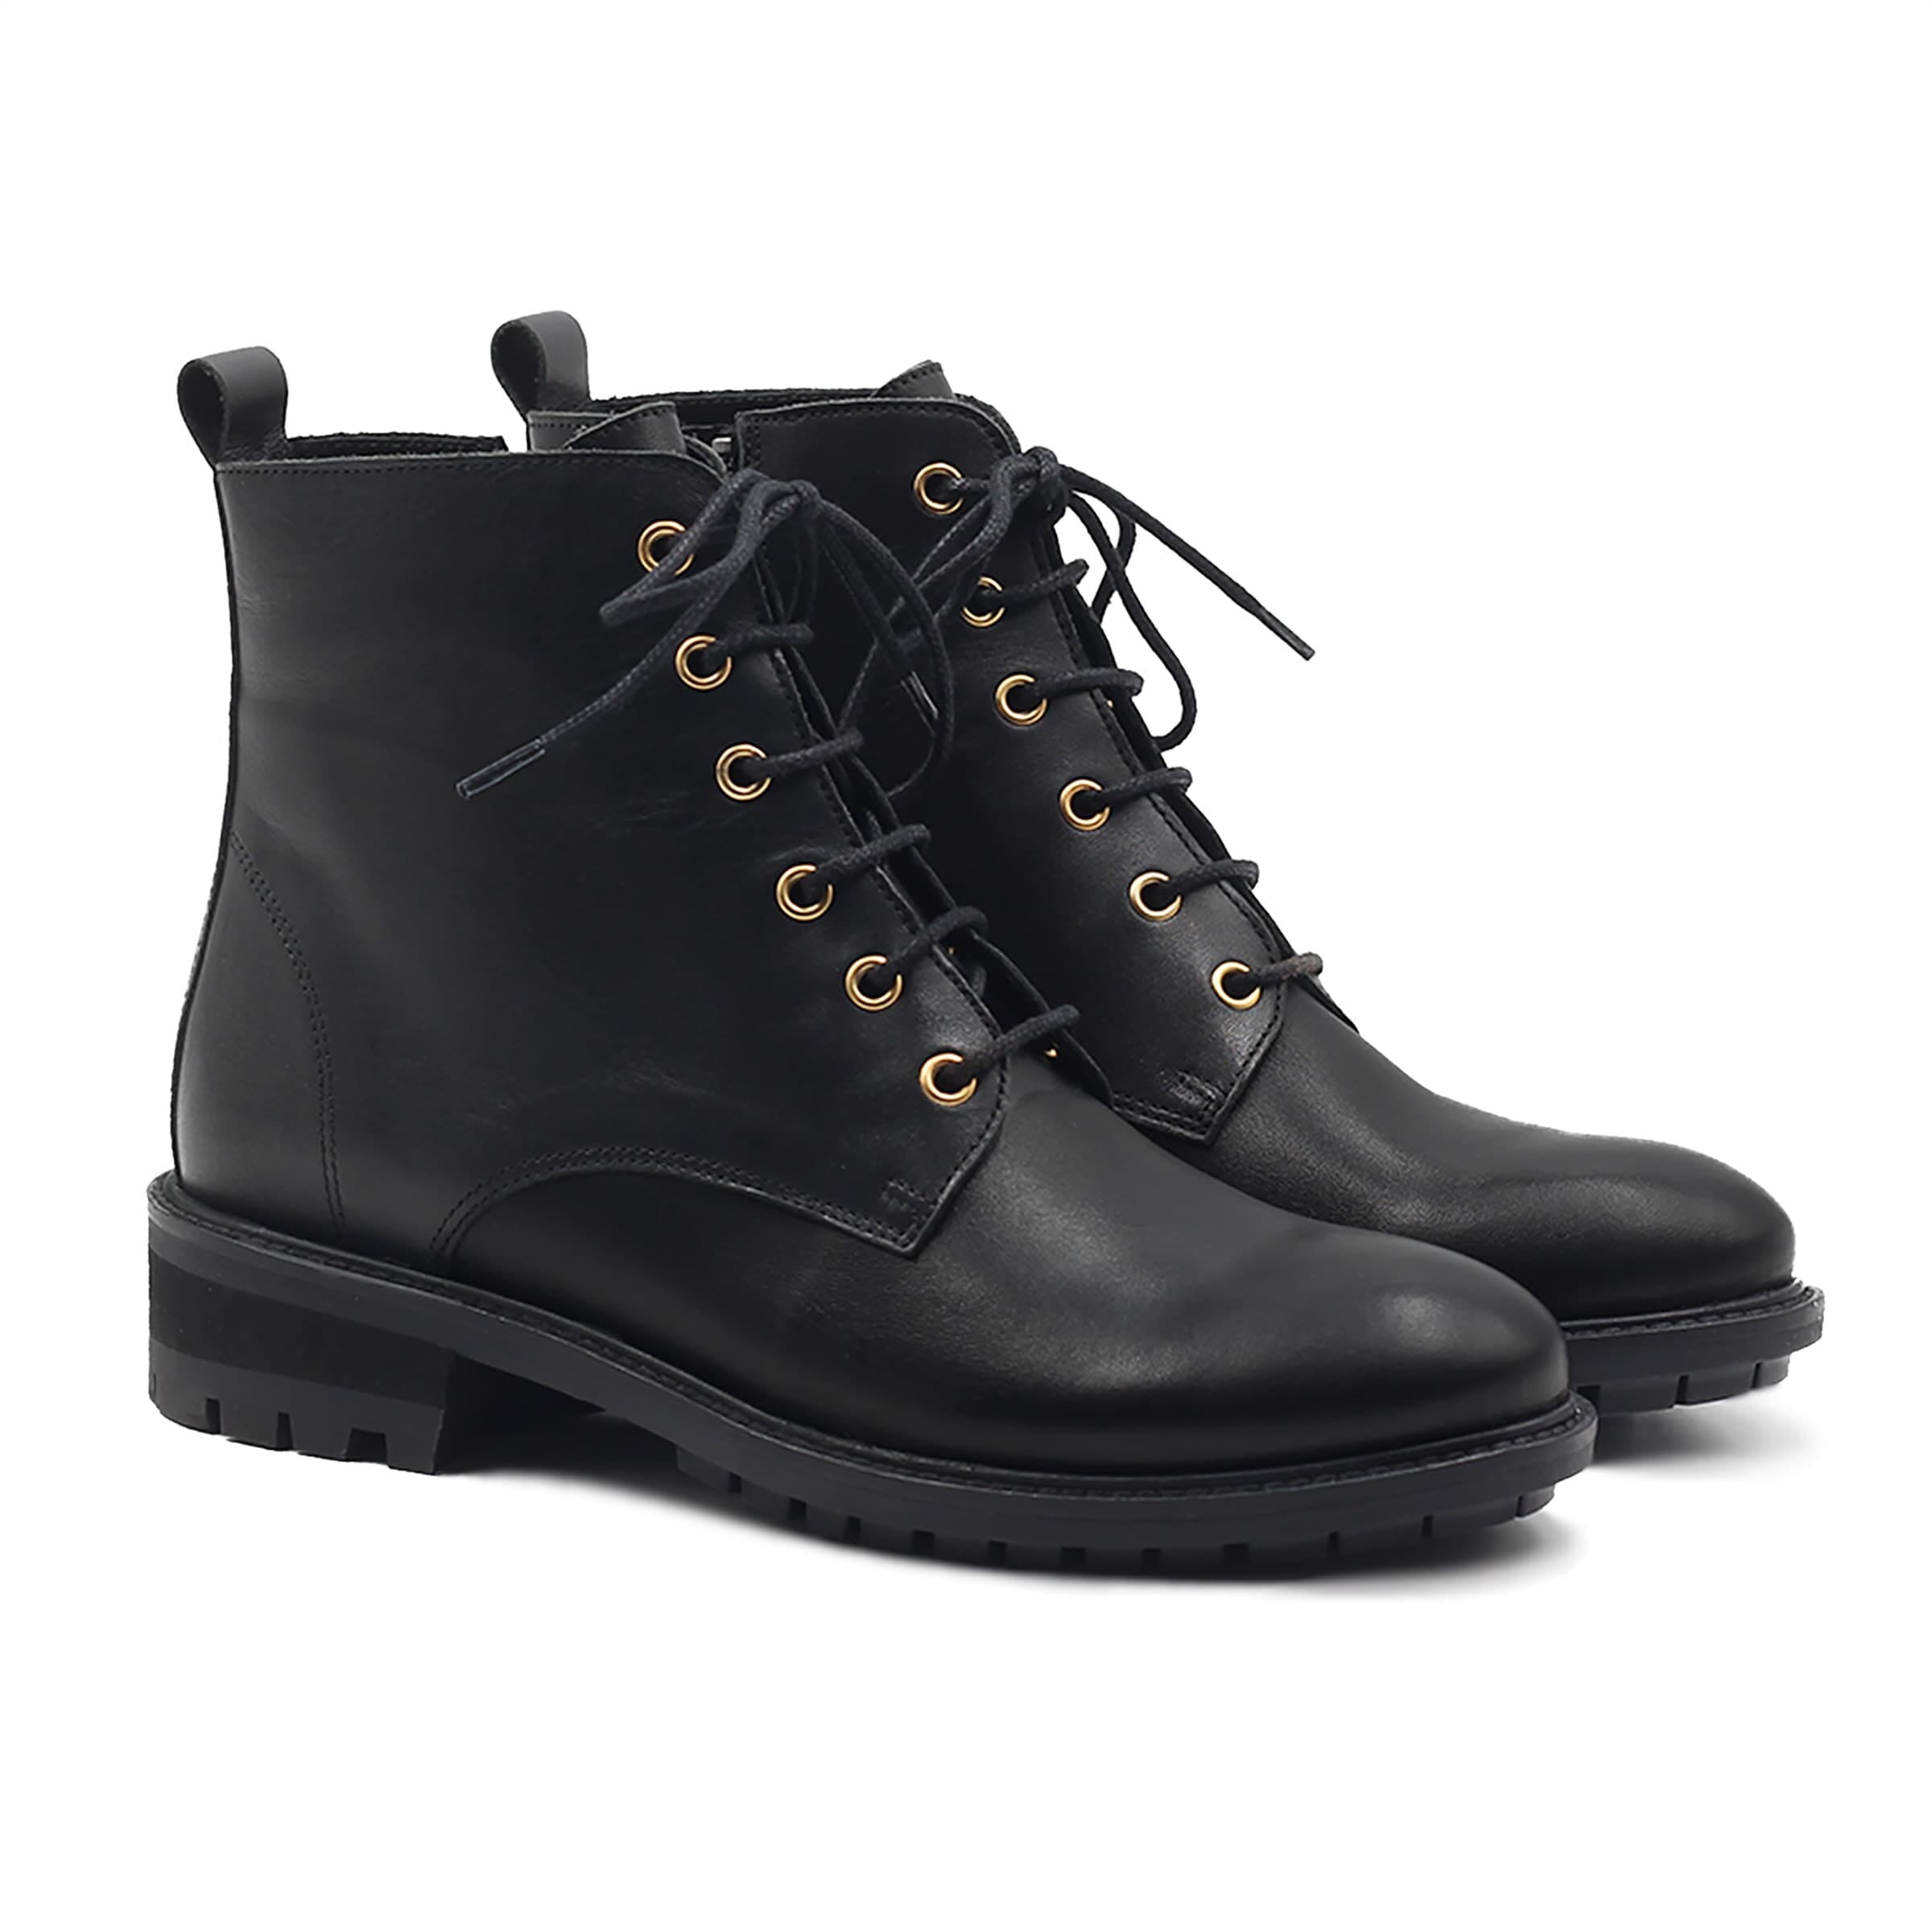 Buy > boots lacets > in stock